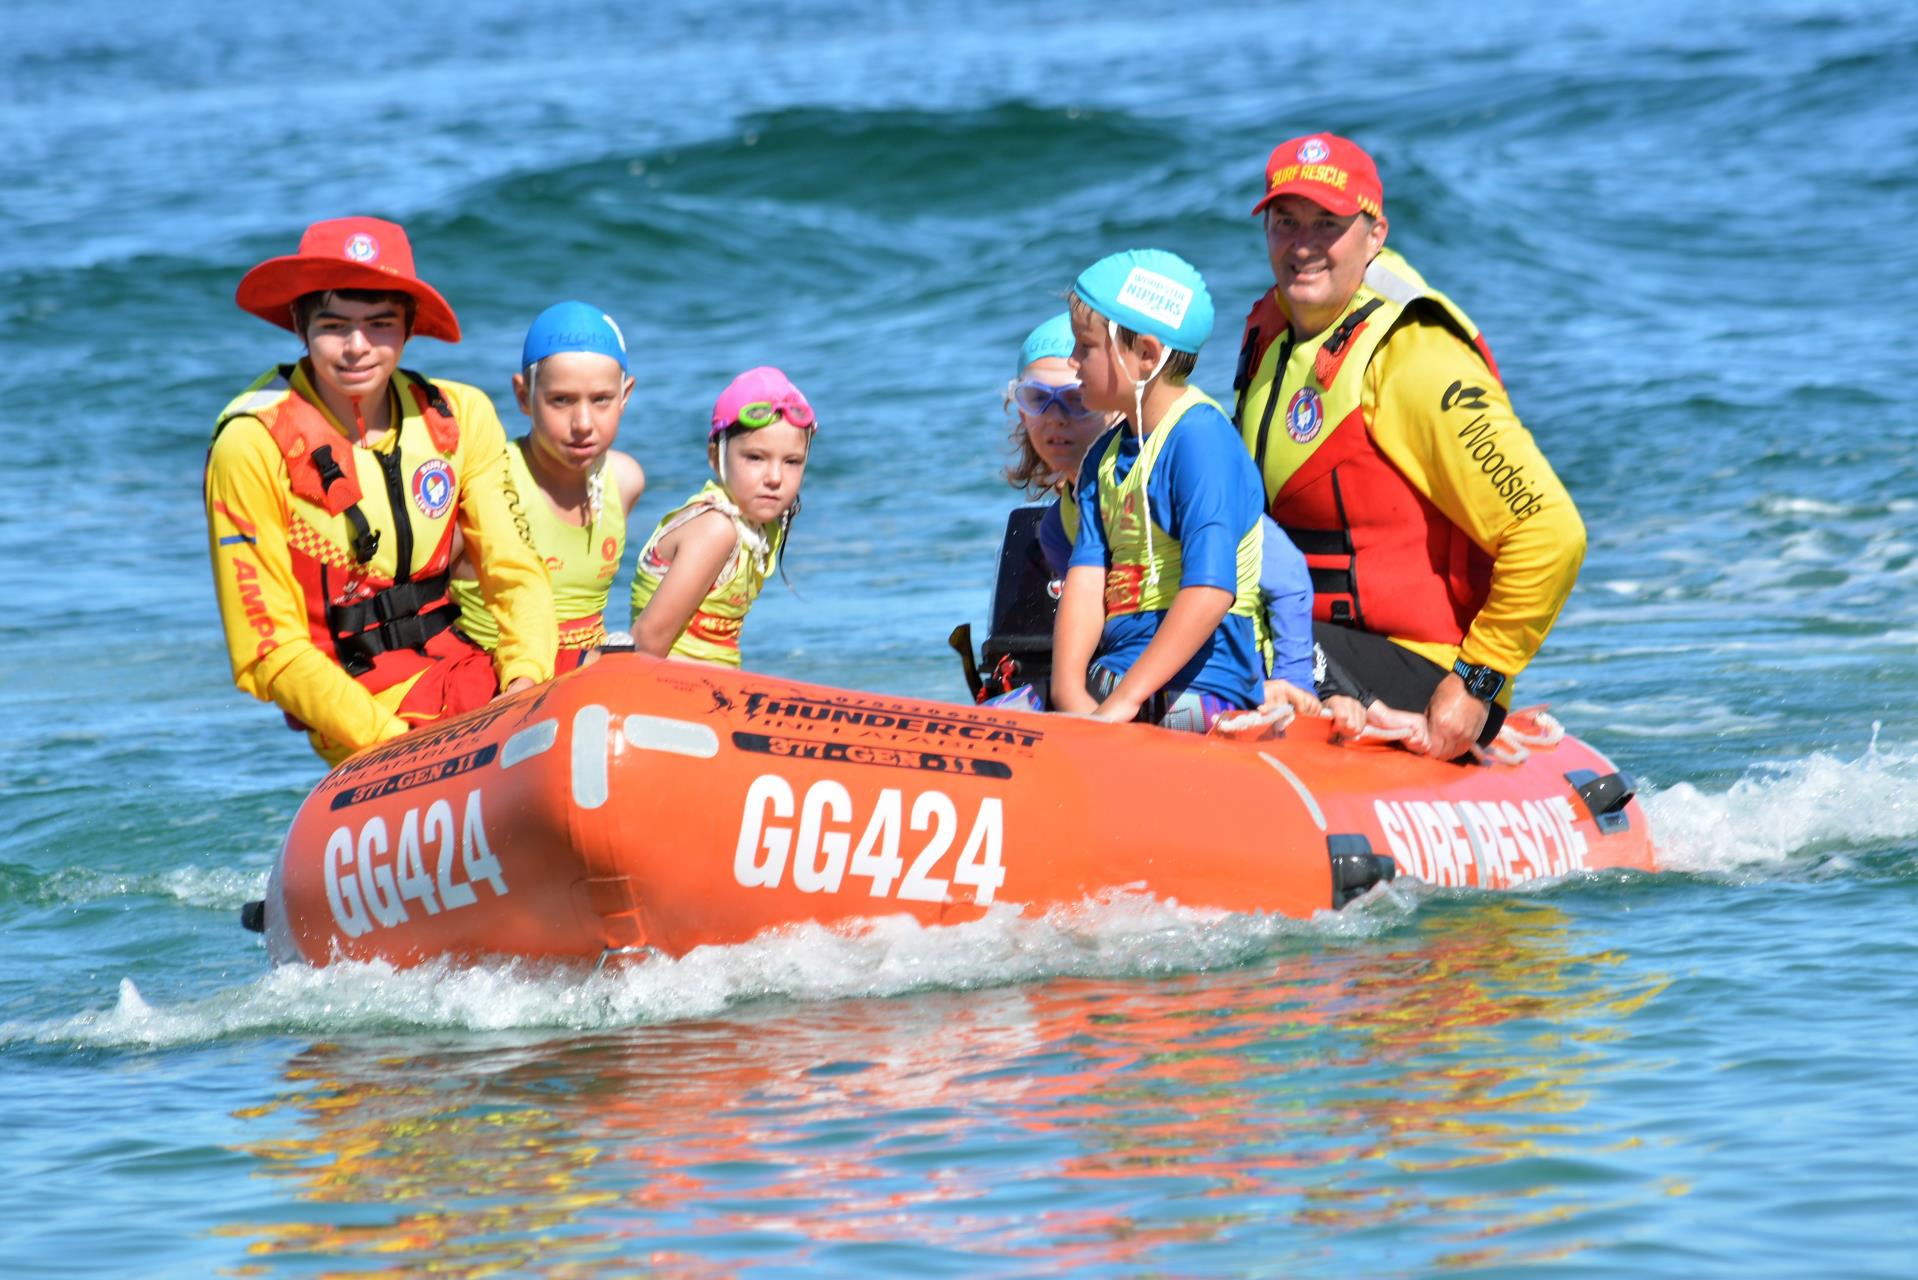 Surf Rescue boat with kids on water